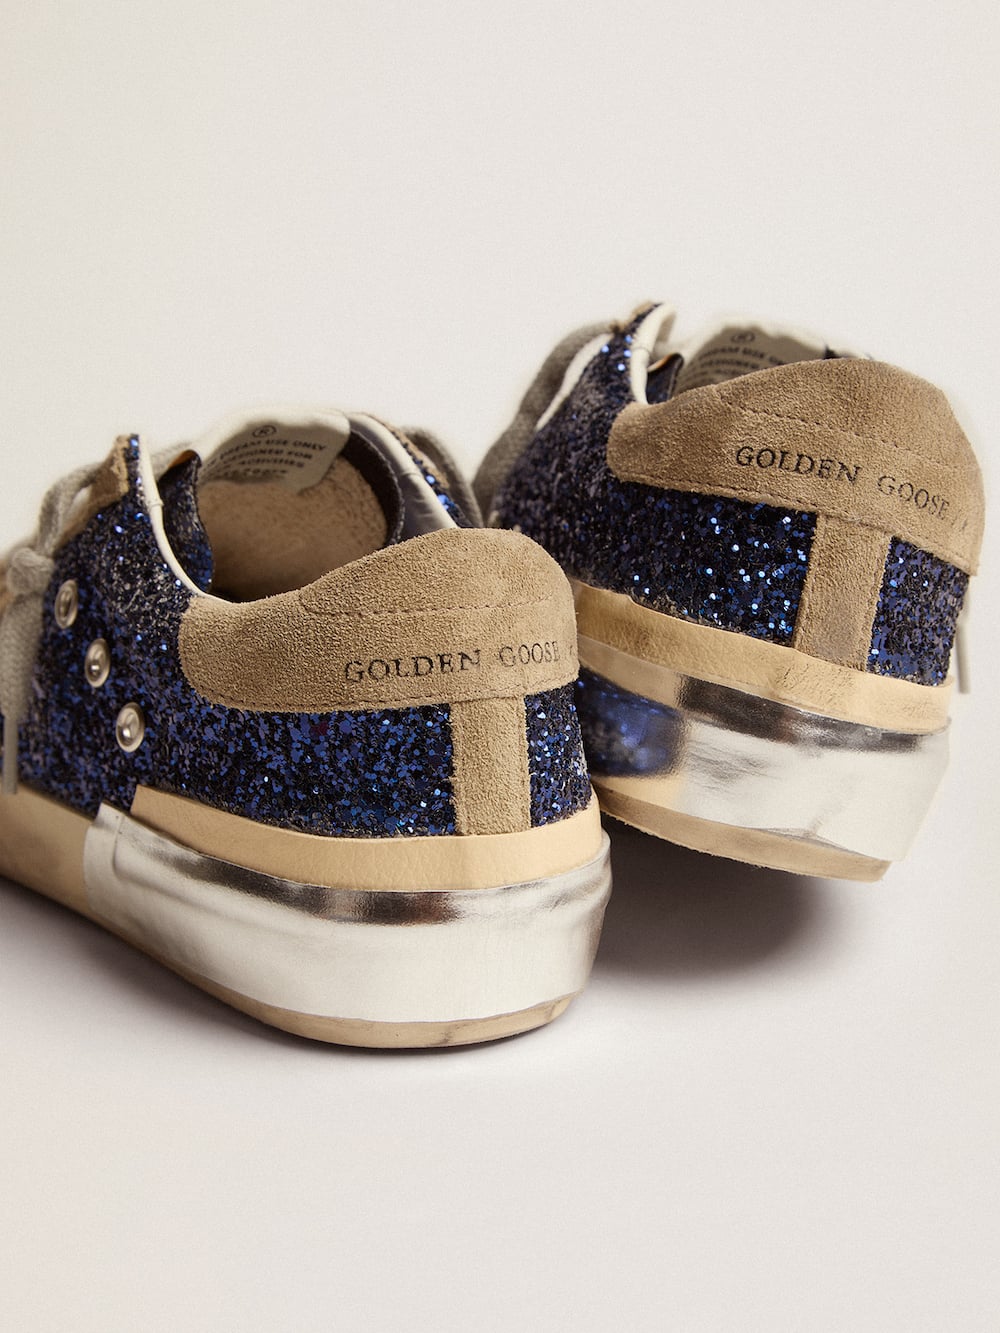 Golden Goose - Women's Super-Star in blue glitter with dove gray suede star in 